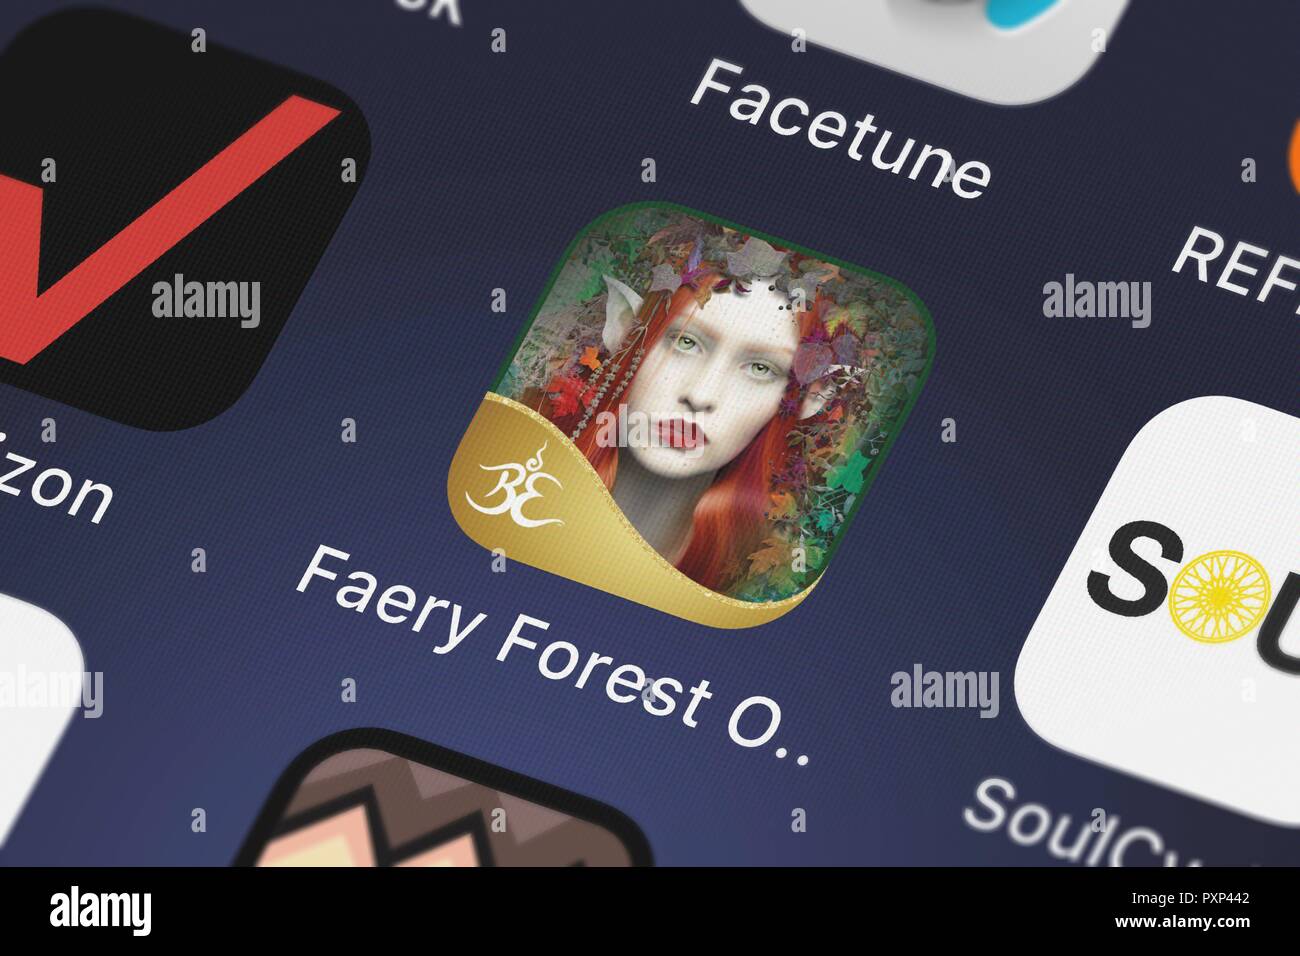 London, United Kingdom - October 23, 2018: The Faery Forest Oracle mobile app from Oceanhouse Media on an iPhone screen. Stock Photo